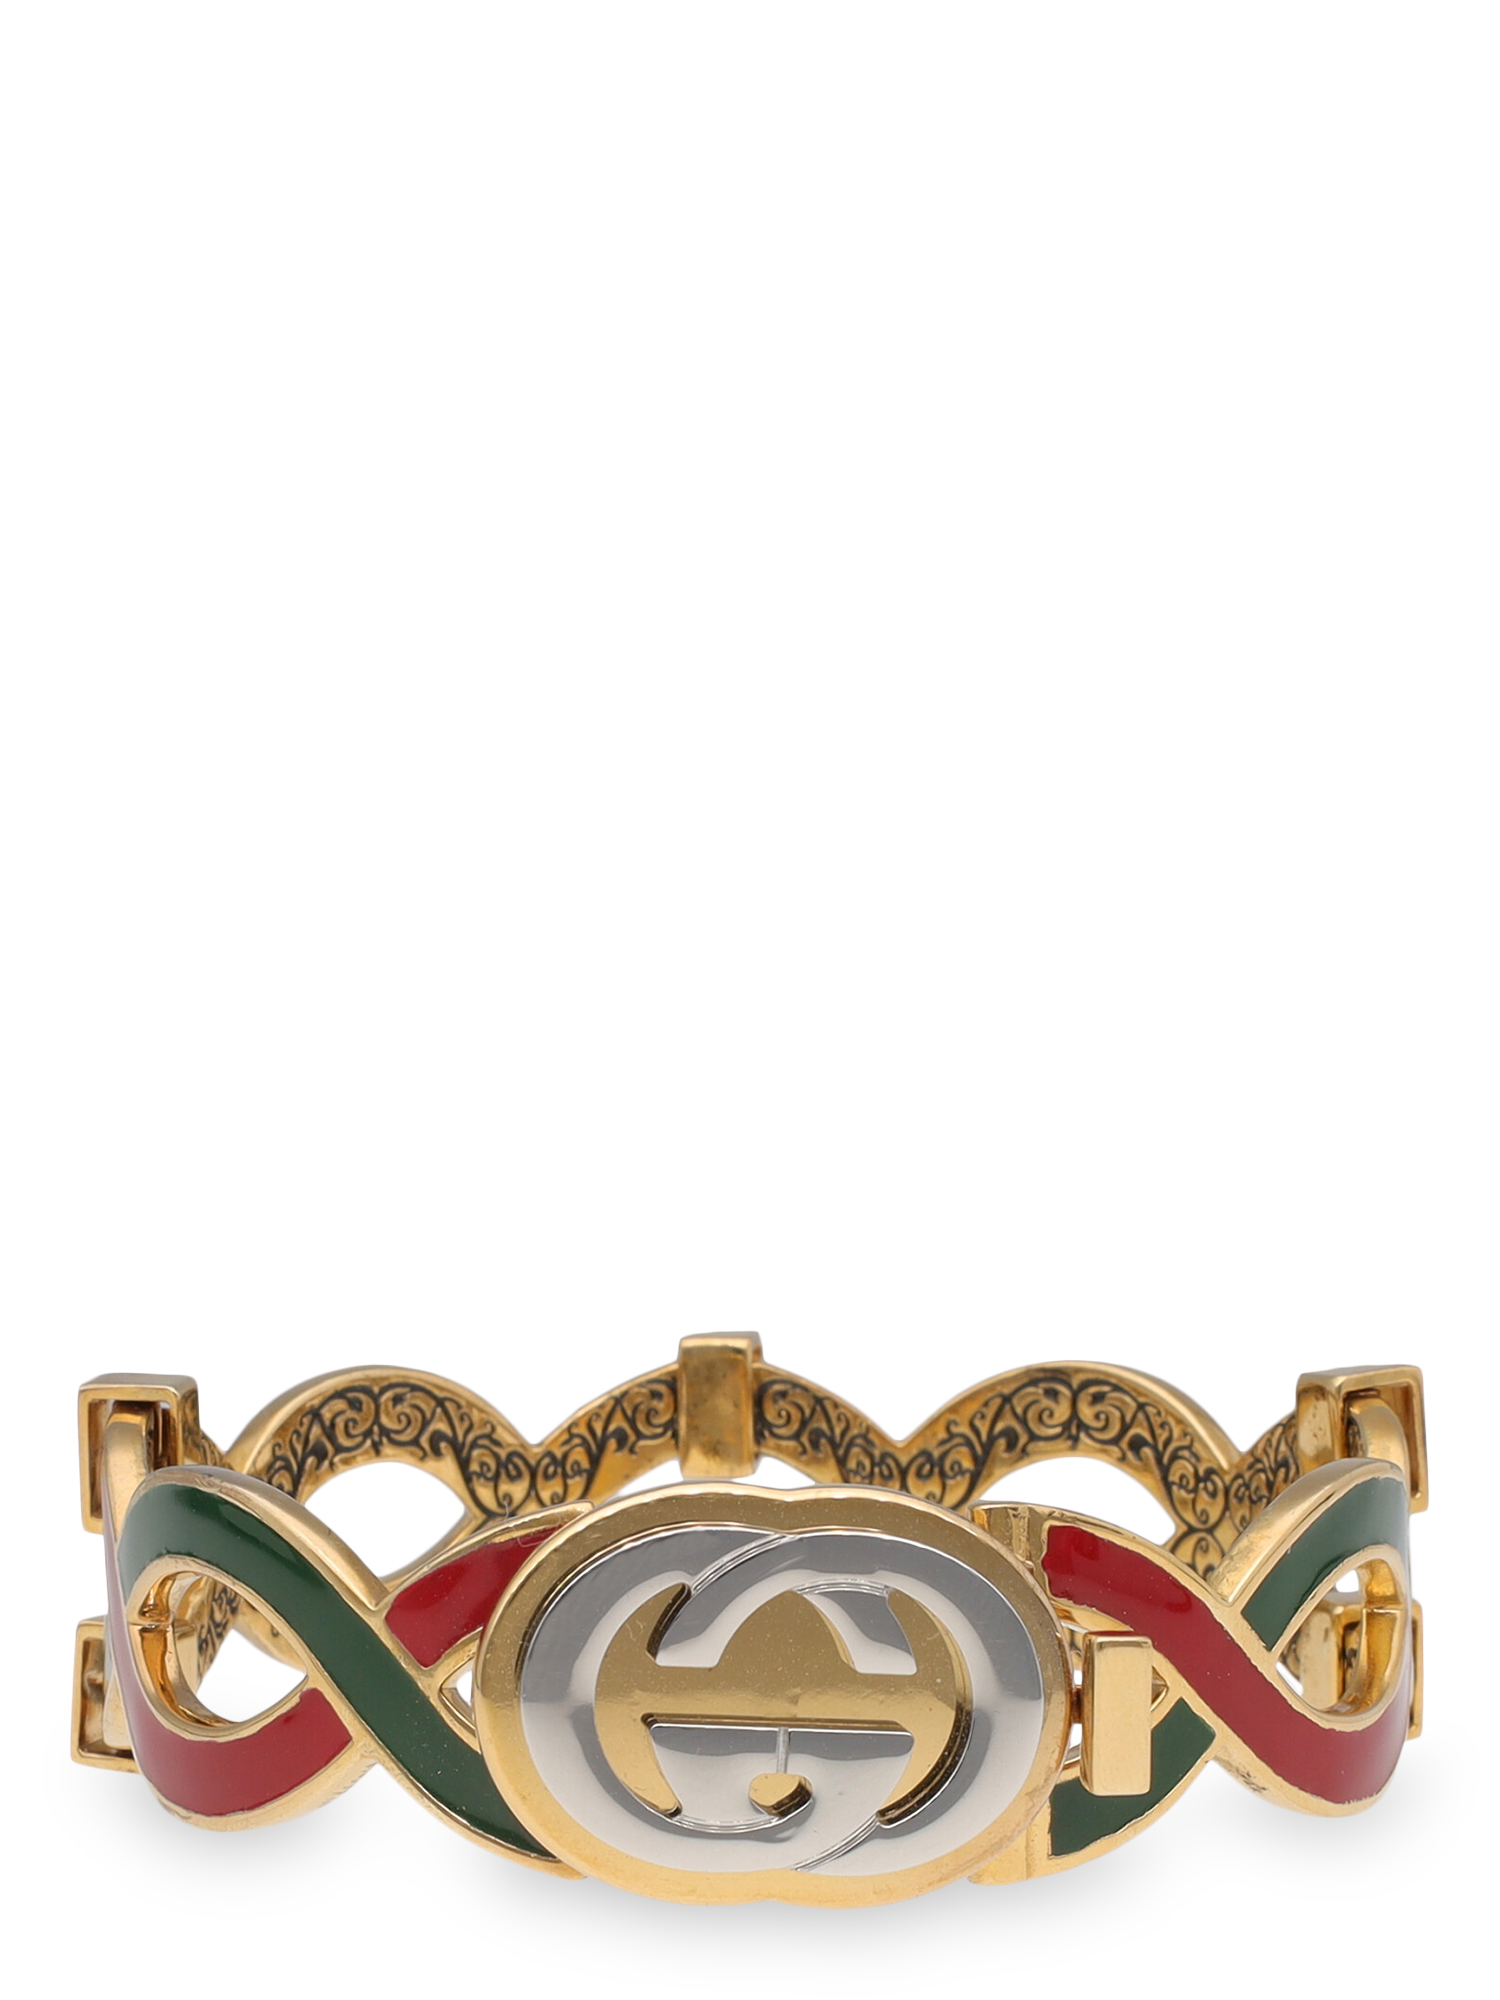 Pre-owned Gucci Women's Bracelets -  - In Green, Gold, Red Metal